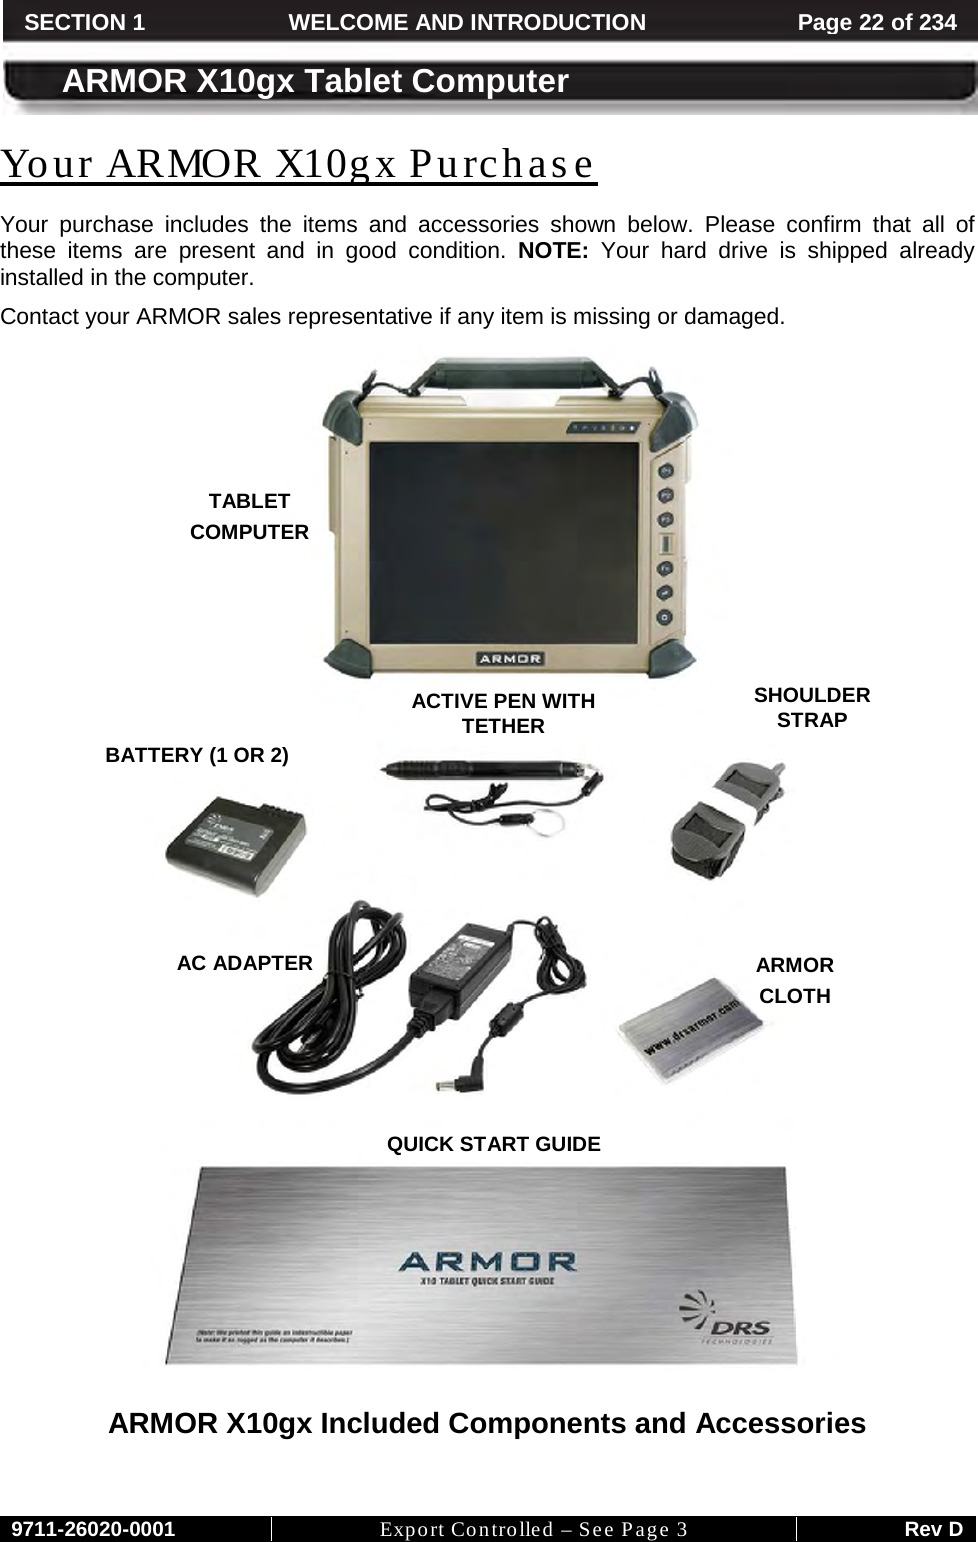     9711-26020-0001 Export Controlled – See Page 3 Rev D SECTION 1 WELCOME AND INTRODUCTION Page 22 of 234  ARMOR X10gx Tablet Computer Your purchase includes the items and accessories shown below. Please confirm that all of these items are present and in good condition. NOTE: Your hard drive is shipped already installed in the computer.  Your ARMOR X10gx Purchase Contact your ARMOR sales representative if any item is missing or damaged.    ARMOR X10gx Included Components and Accessories   TABLET  COMPUTER QUICK START GUIDE AC ADAPTER BATTERY (1 OR 2) ACTIVE PEN WITH TETHER ARMOR  CLOTH SHOULDER STRAP 